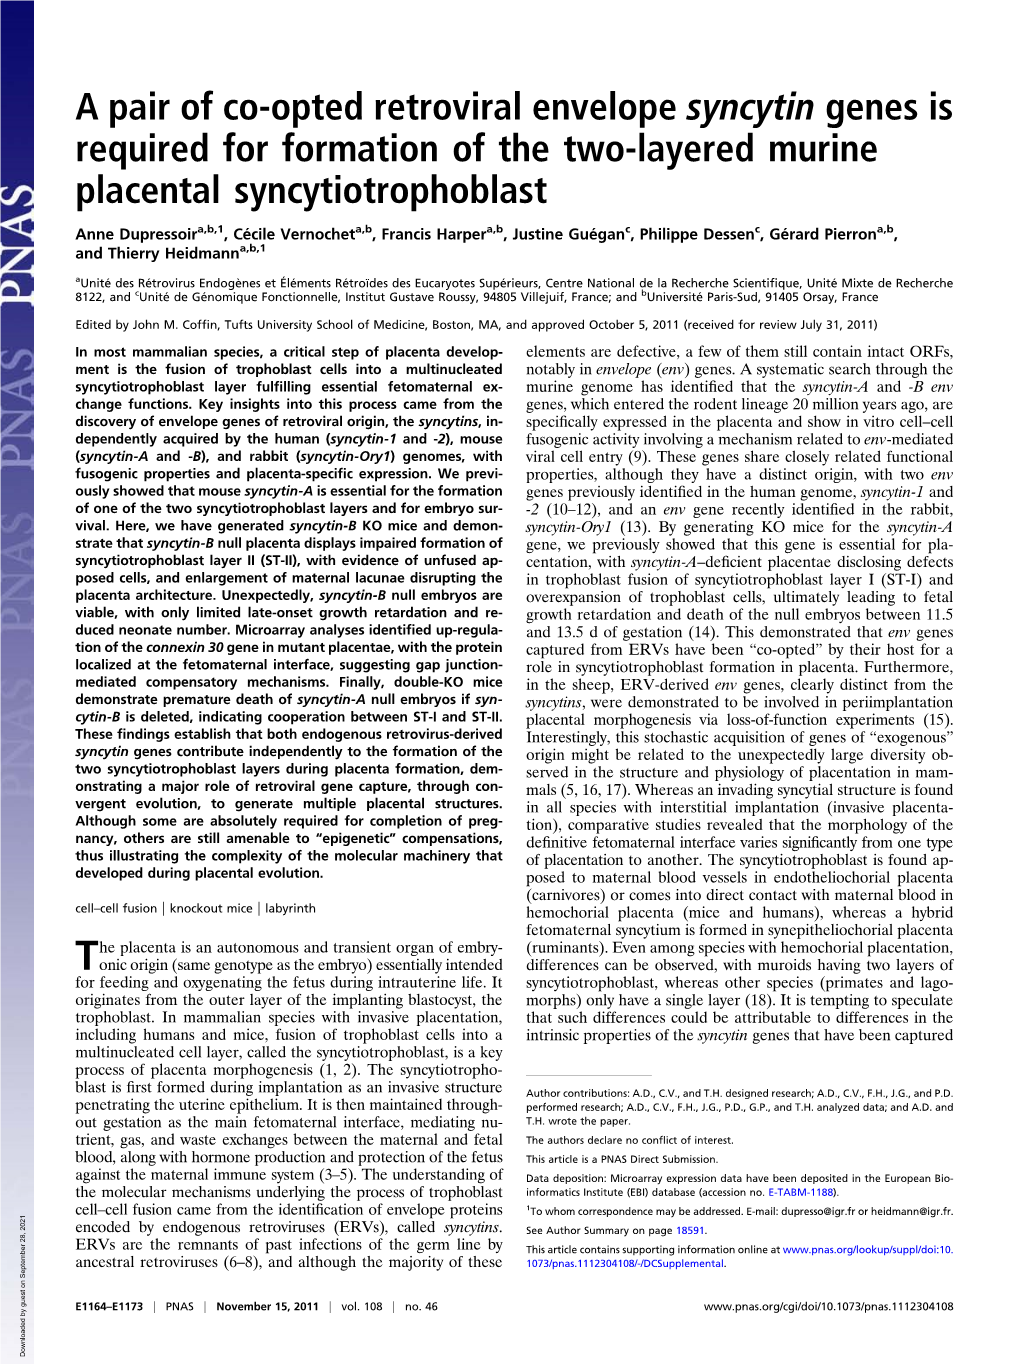 A Pair of Co-Opted Retroviral Envelope Syncytin Genes Is Required for Formation of the Two-Layered Murine Placental Syncytiotrophoblast